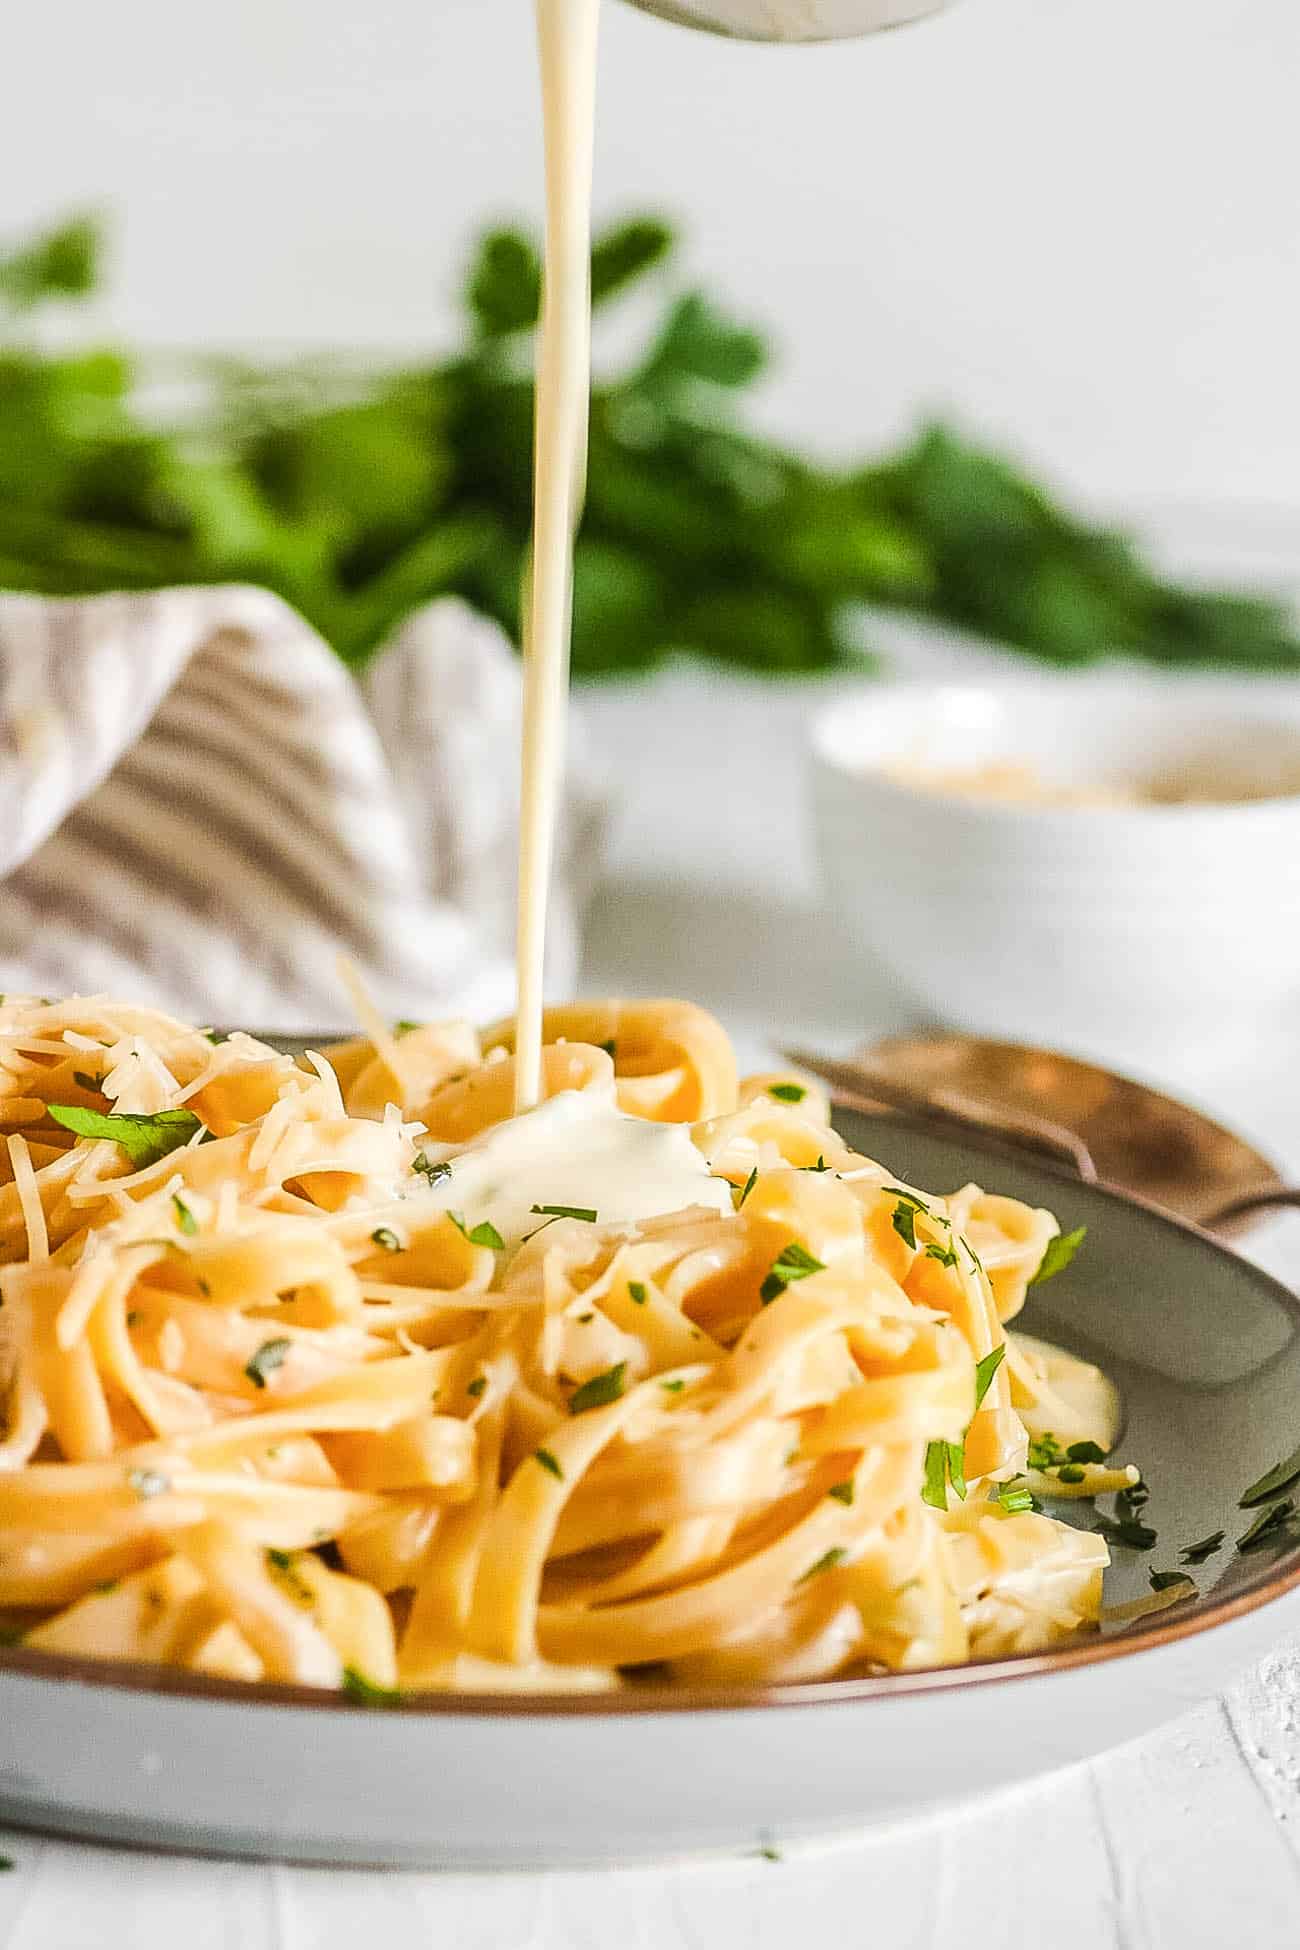 alfredo sauce without heavy cream drizzled over fettuccine pasta